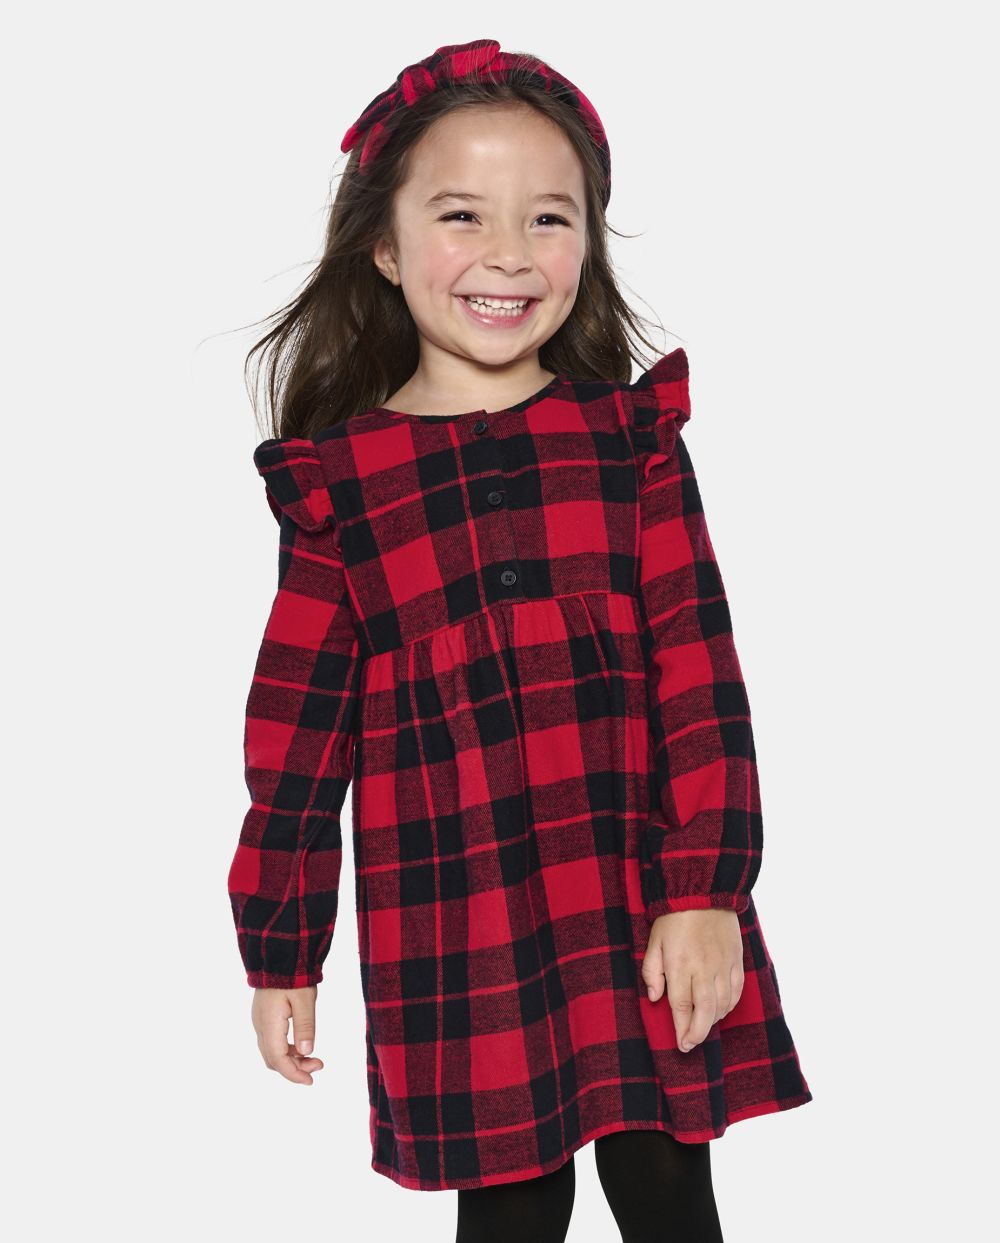 Toddler Baby Crew Neck Button Front Plaid Print Above the Knee Flutter Long Sleeves Shirt Dress